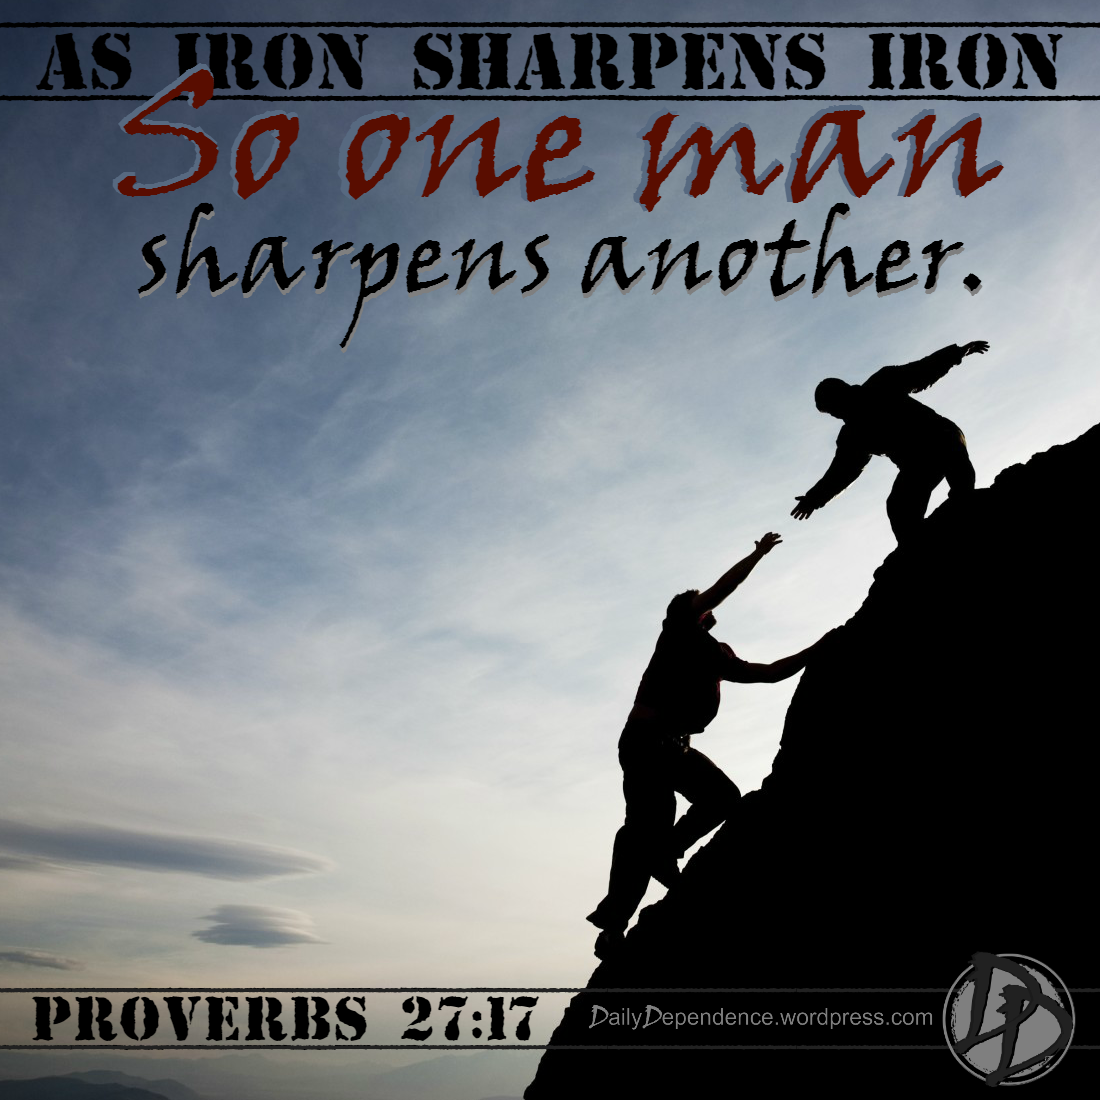 101-daily-dependence-proverbs-27-17-iron-sharpens-iron